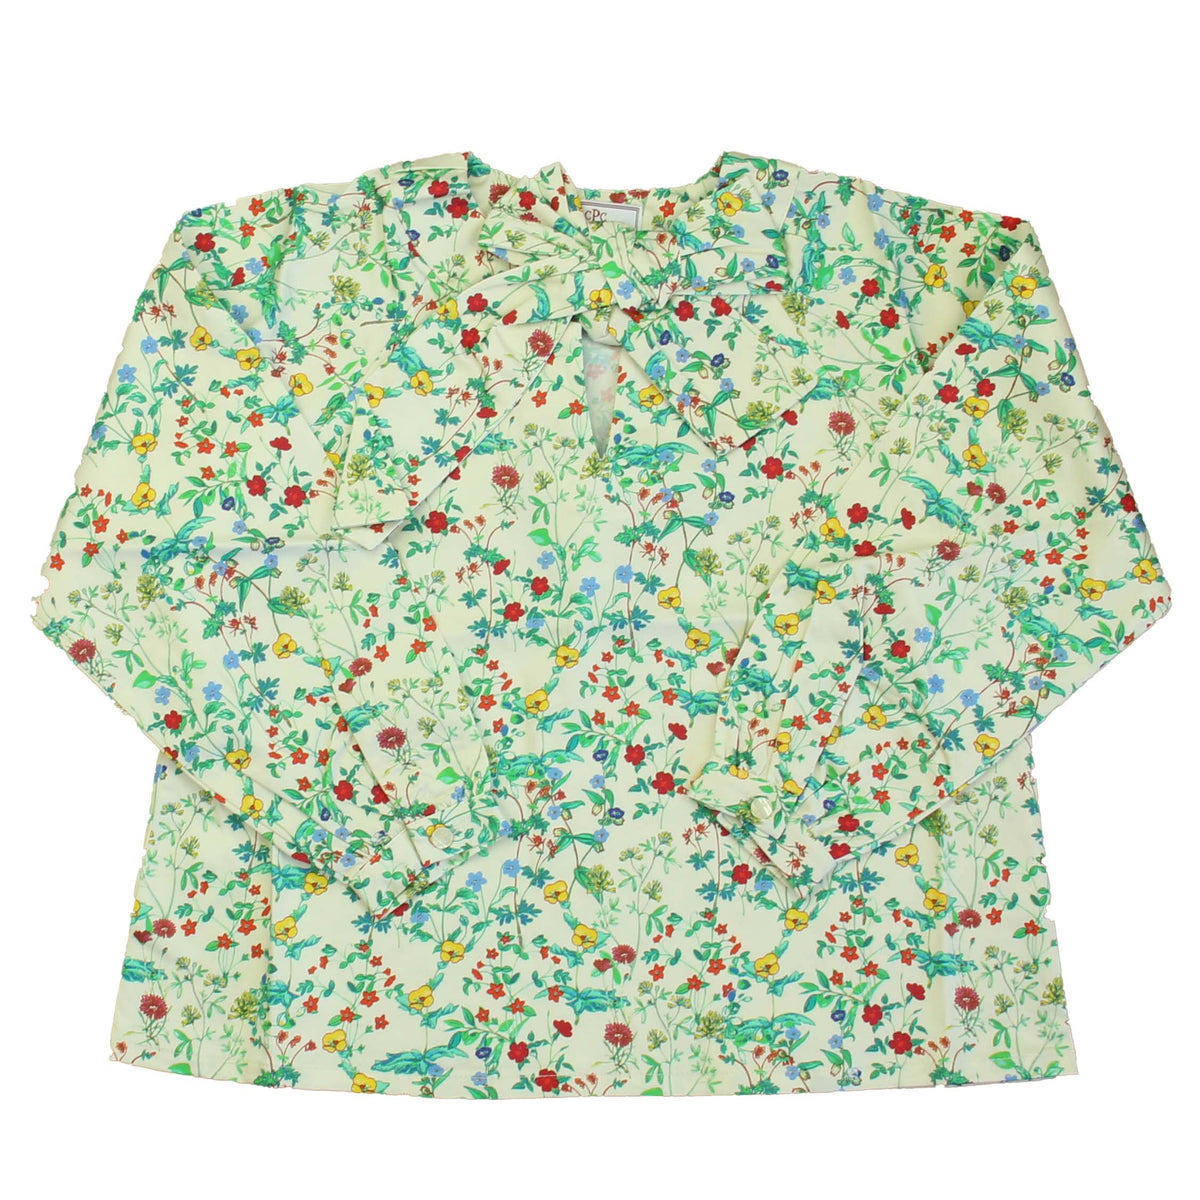 New with Tags: Fall Floral Top -- FINAL SALE